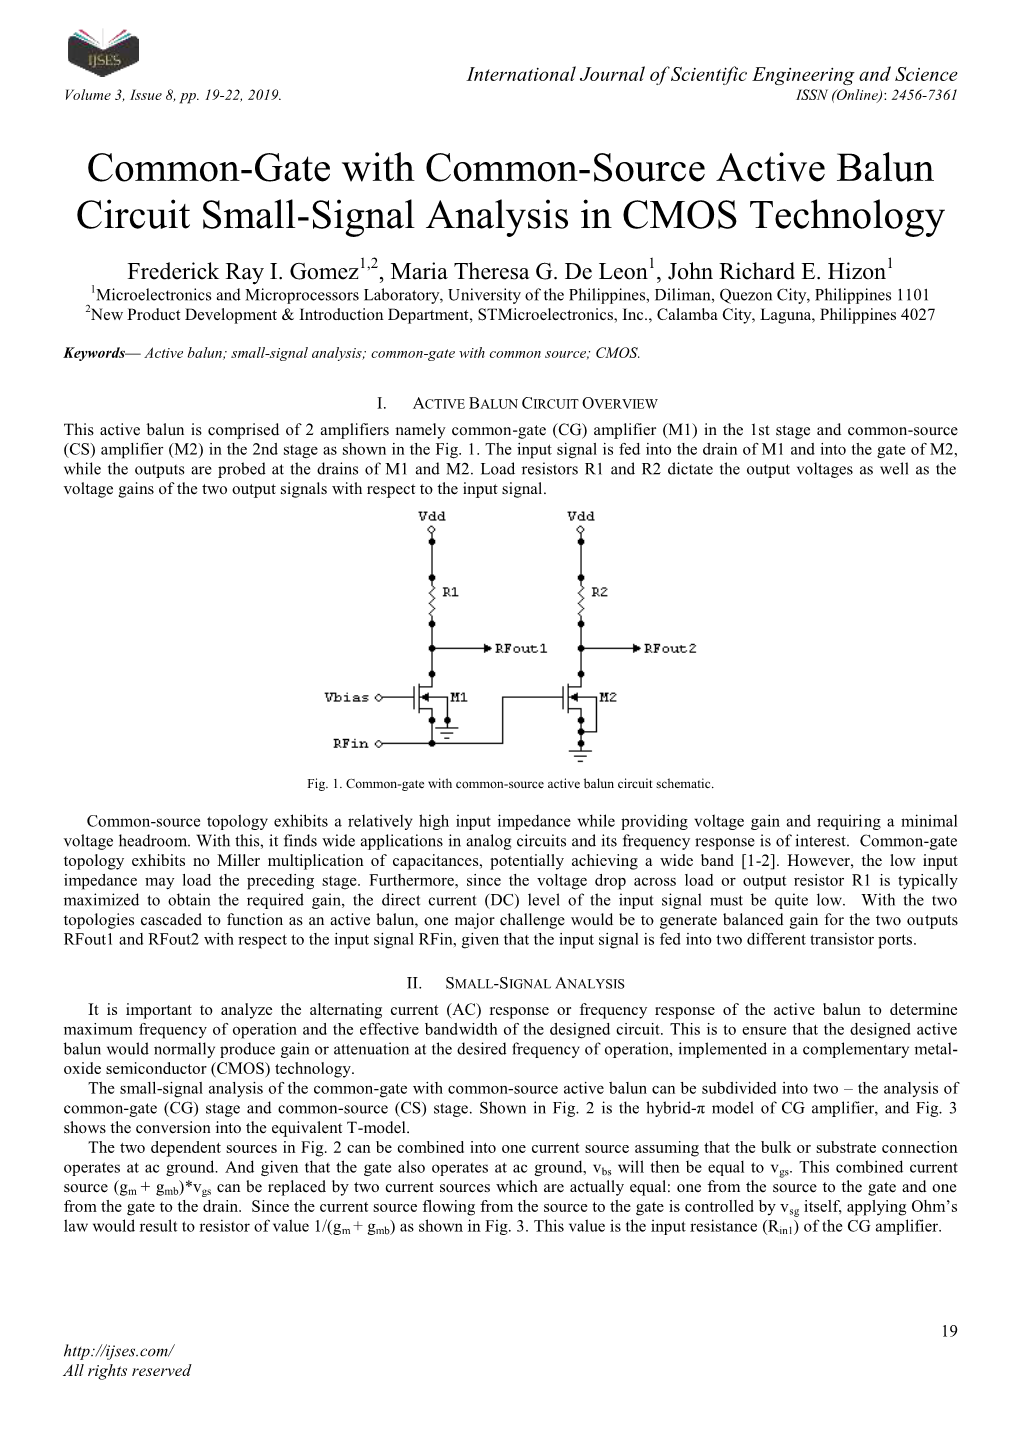 Common-Gate with Common-Source Active Balun Circuit Small-Signal Analysis in CMOS Technology